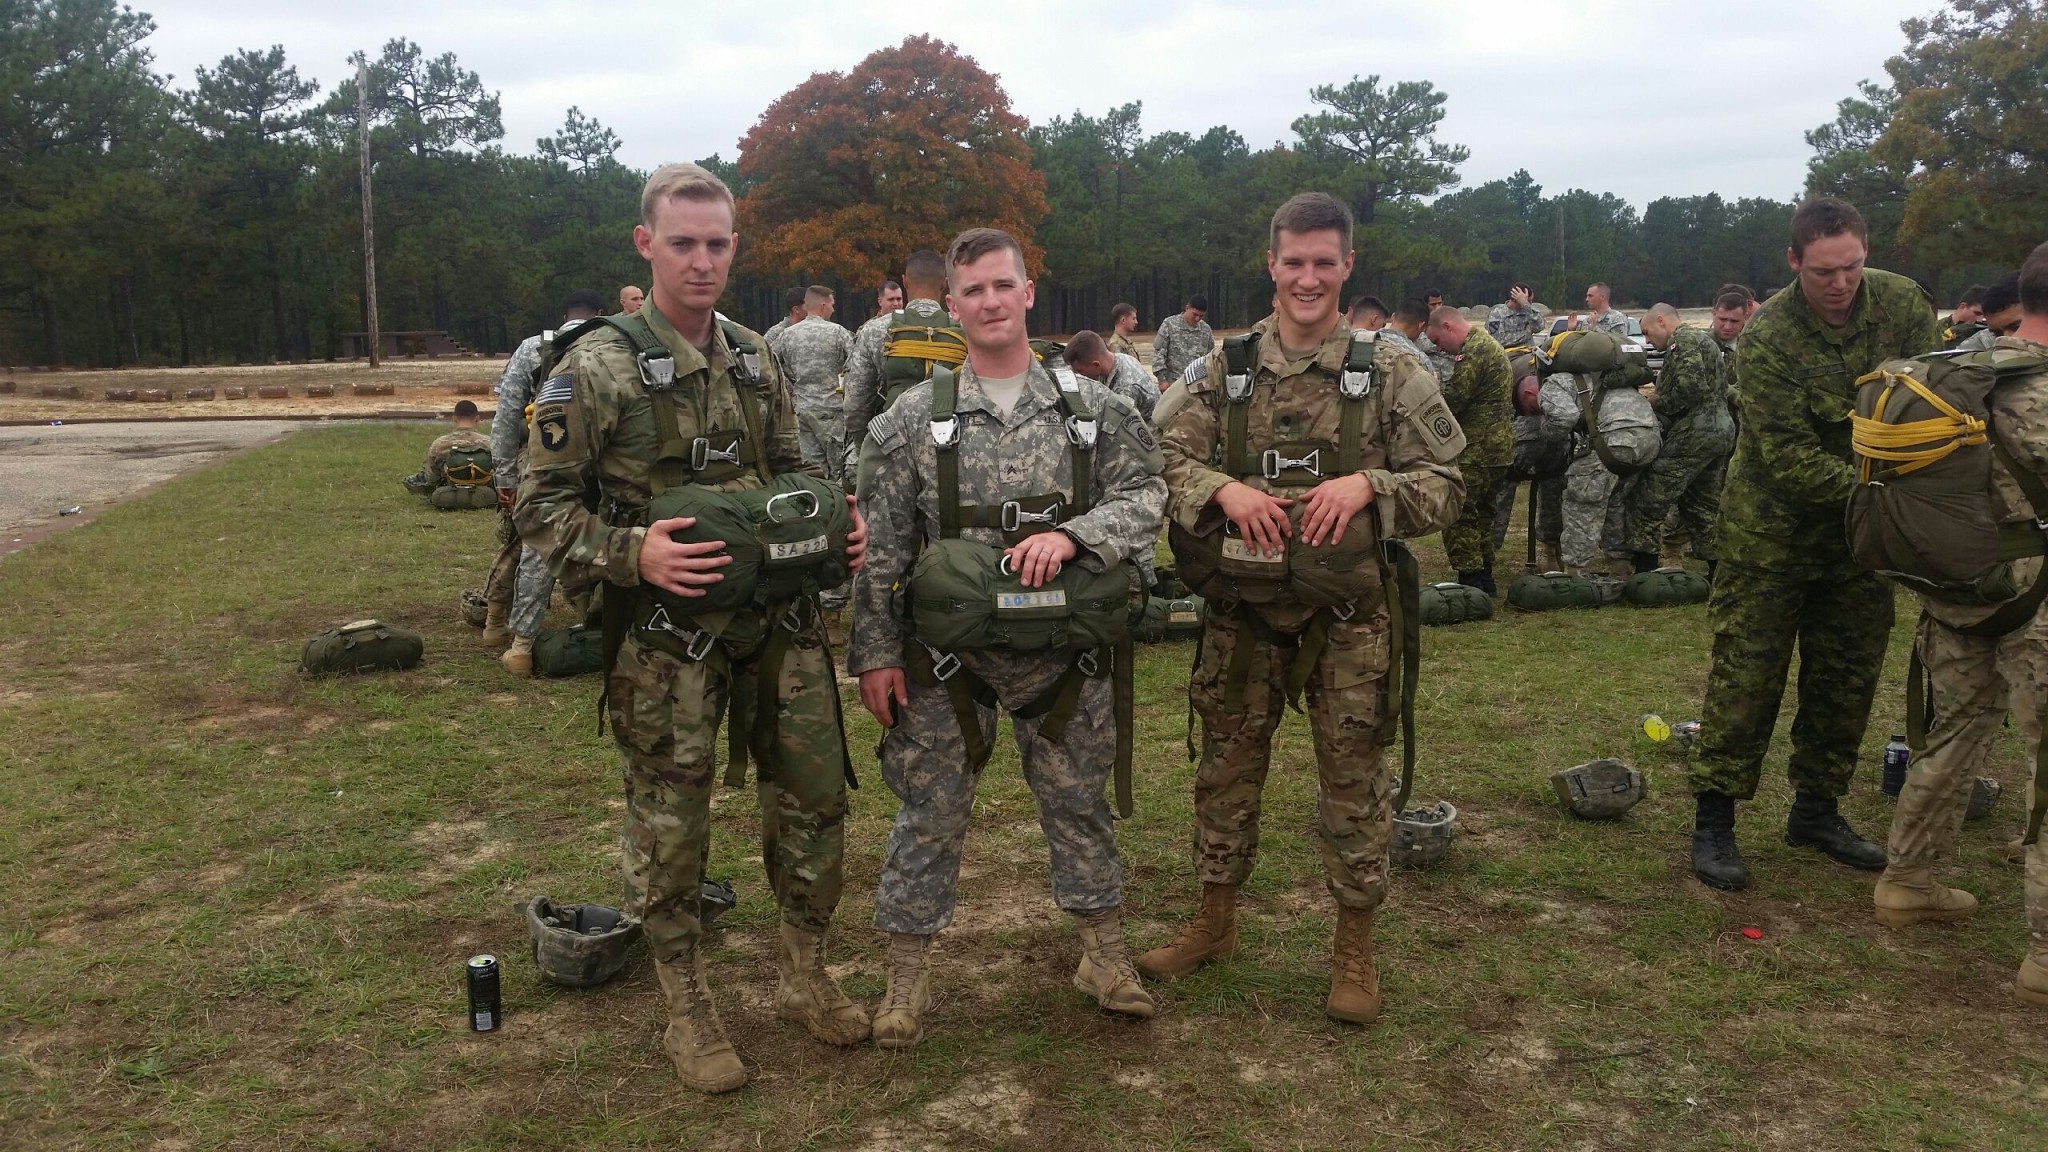 Spec. Tyler Nichols is pictured third from left to right ready for a "jump" with fellow 82nd Paratroopers.